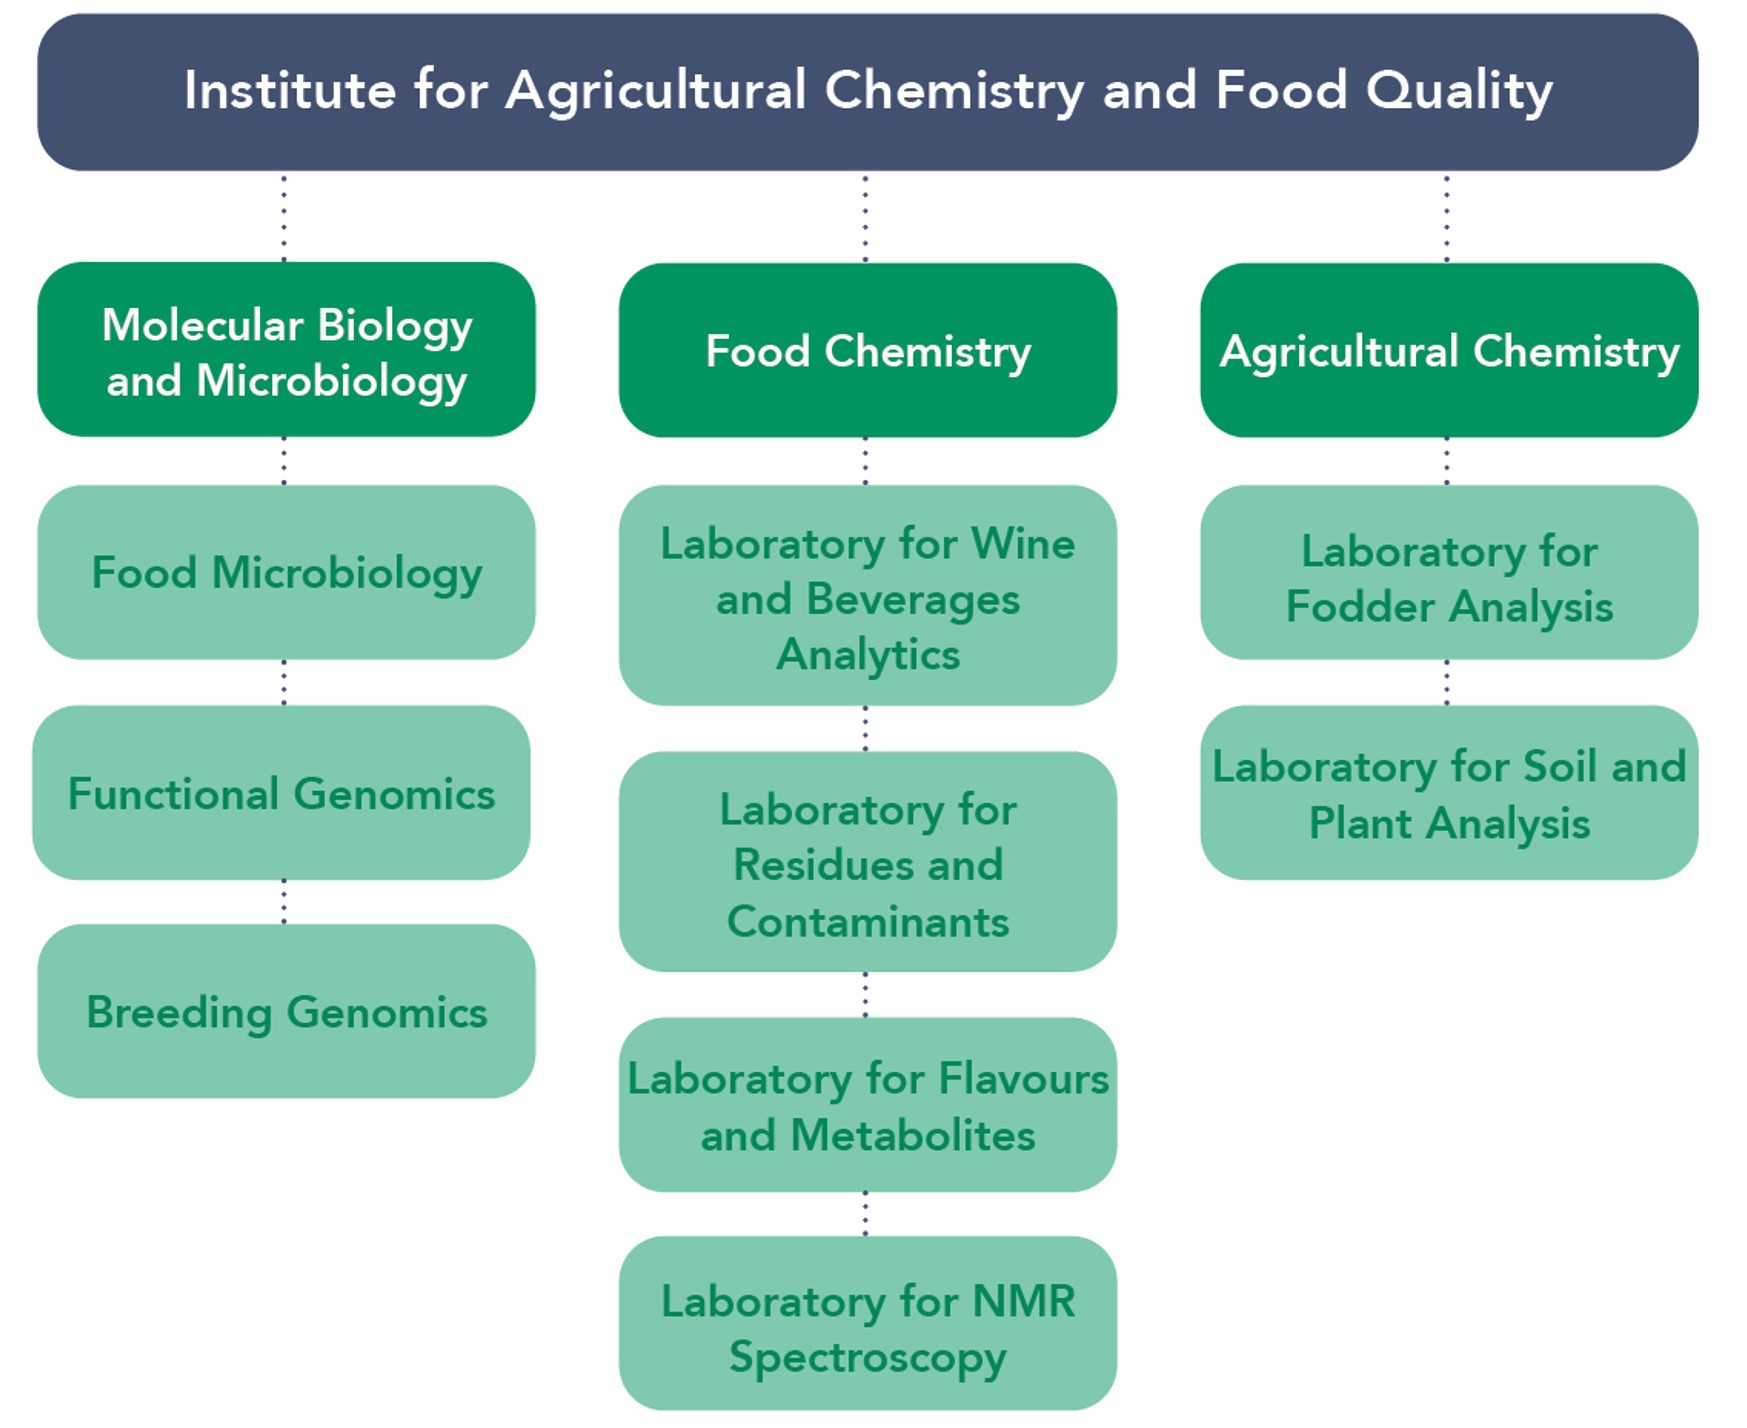 Organization Chart Institute for Agricultural Chemistry and Food Quality 2023